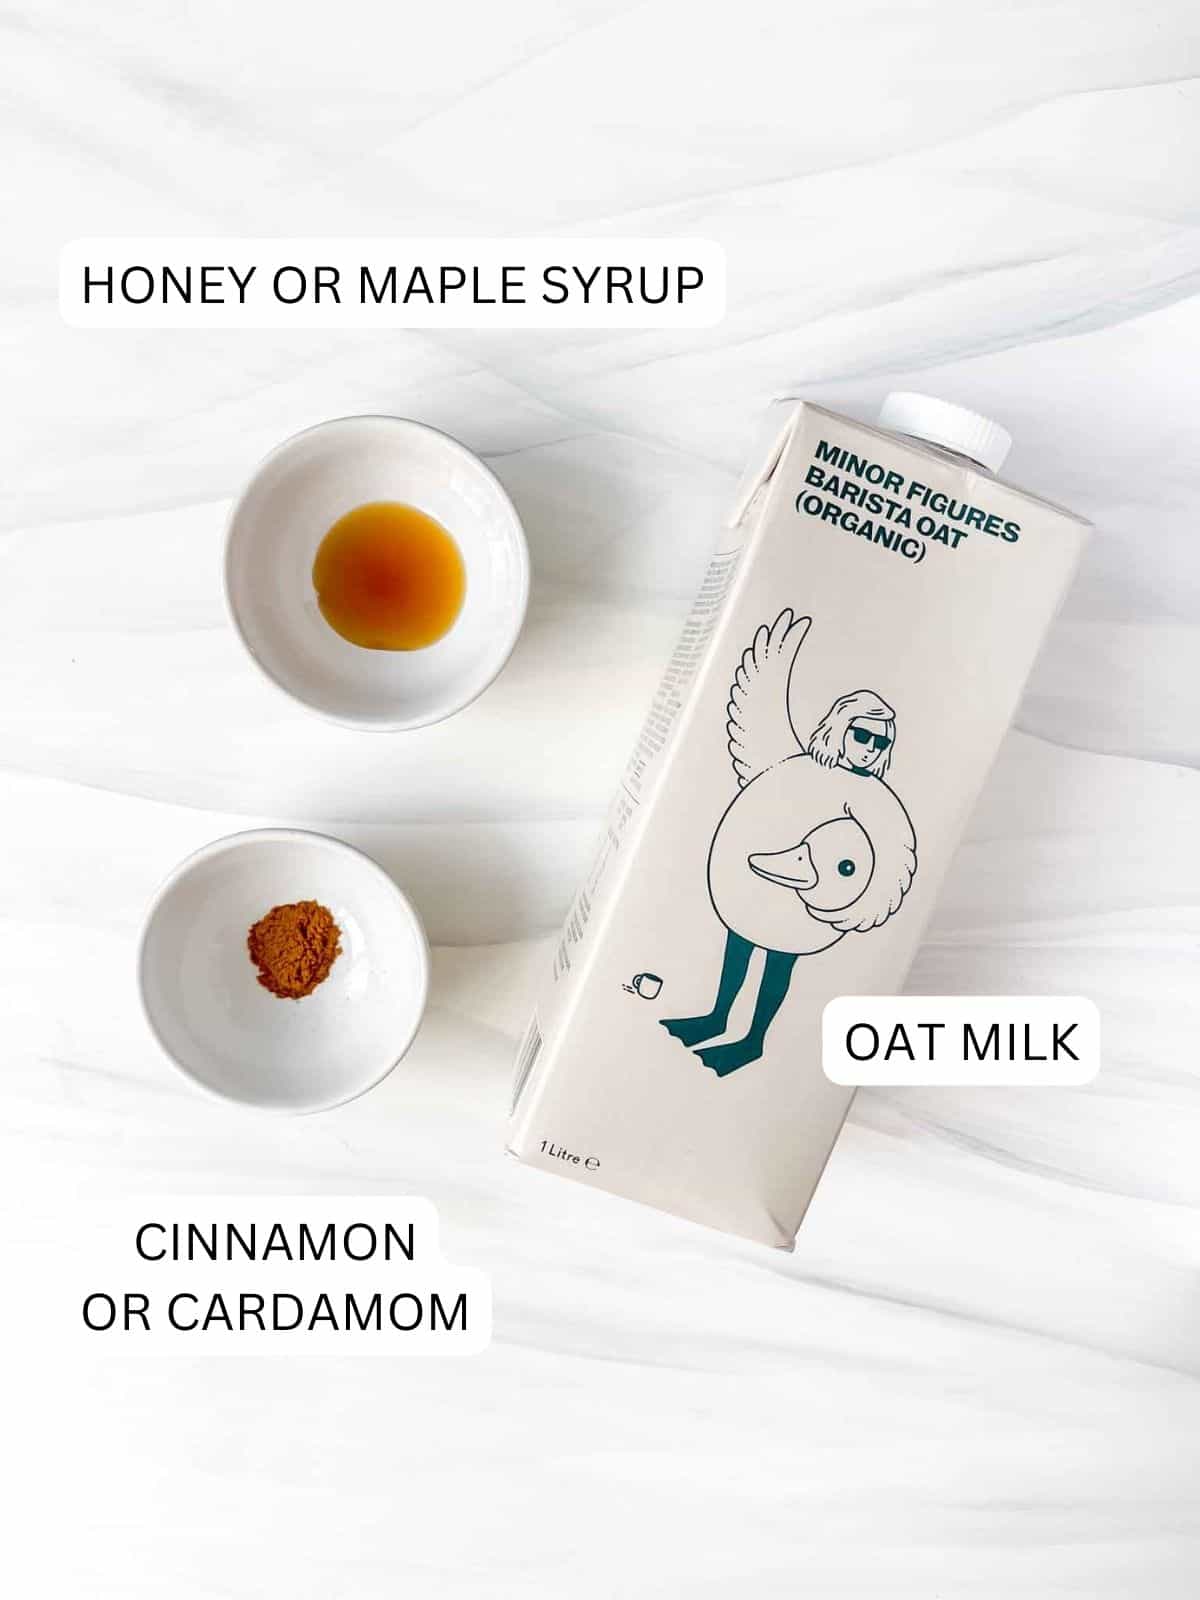 labelled oat milk in a carton, honey or maple syrup and cinnamon or cardamom in small bowls.